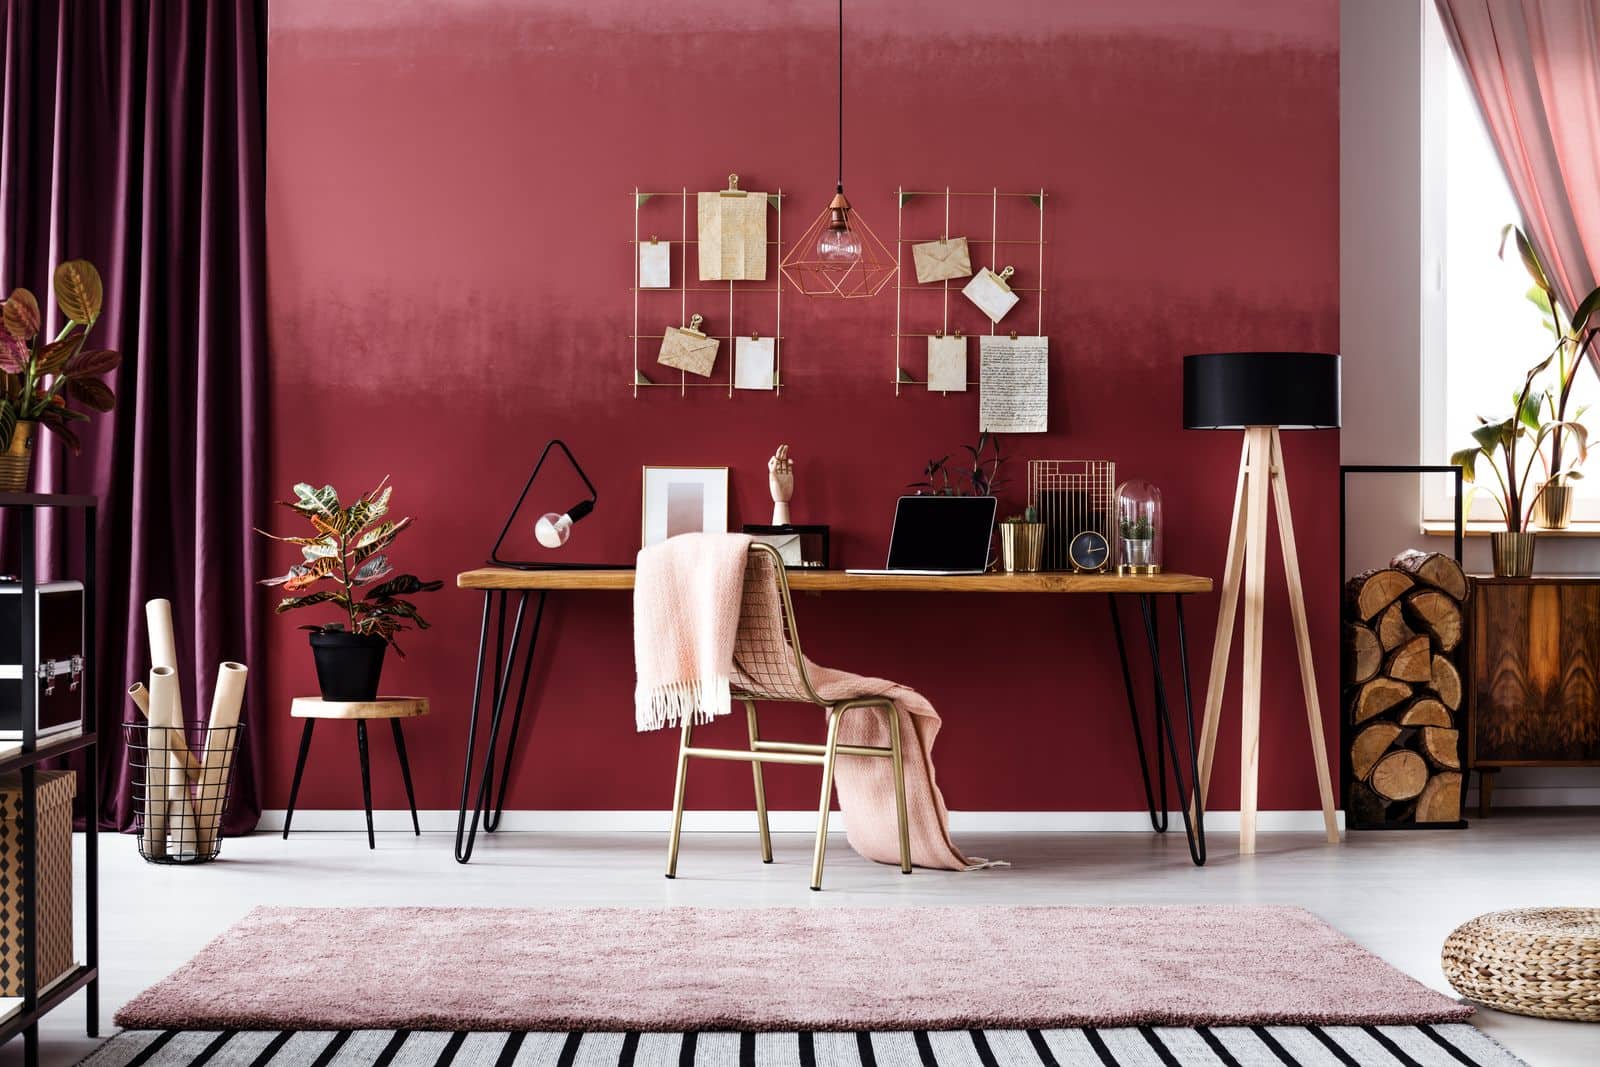 Home office with burgundy tones